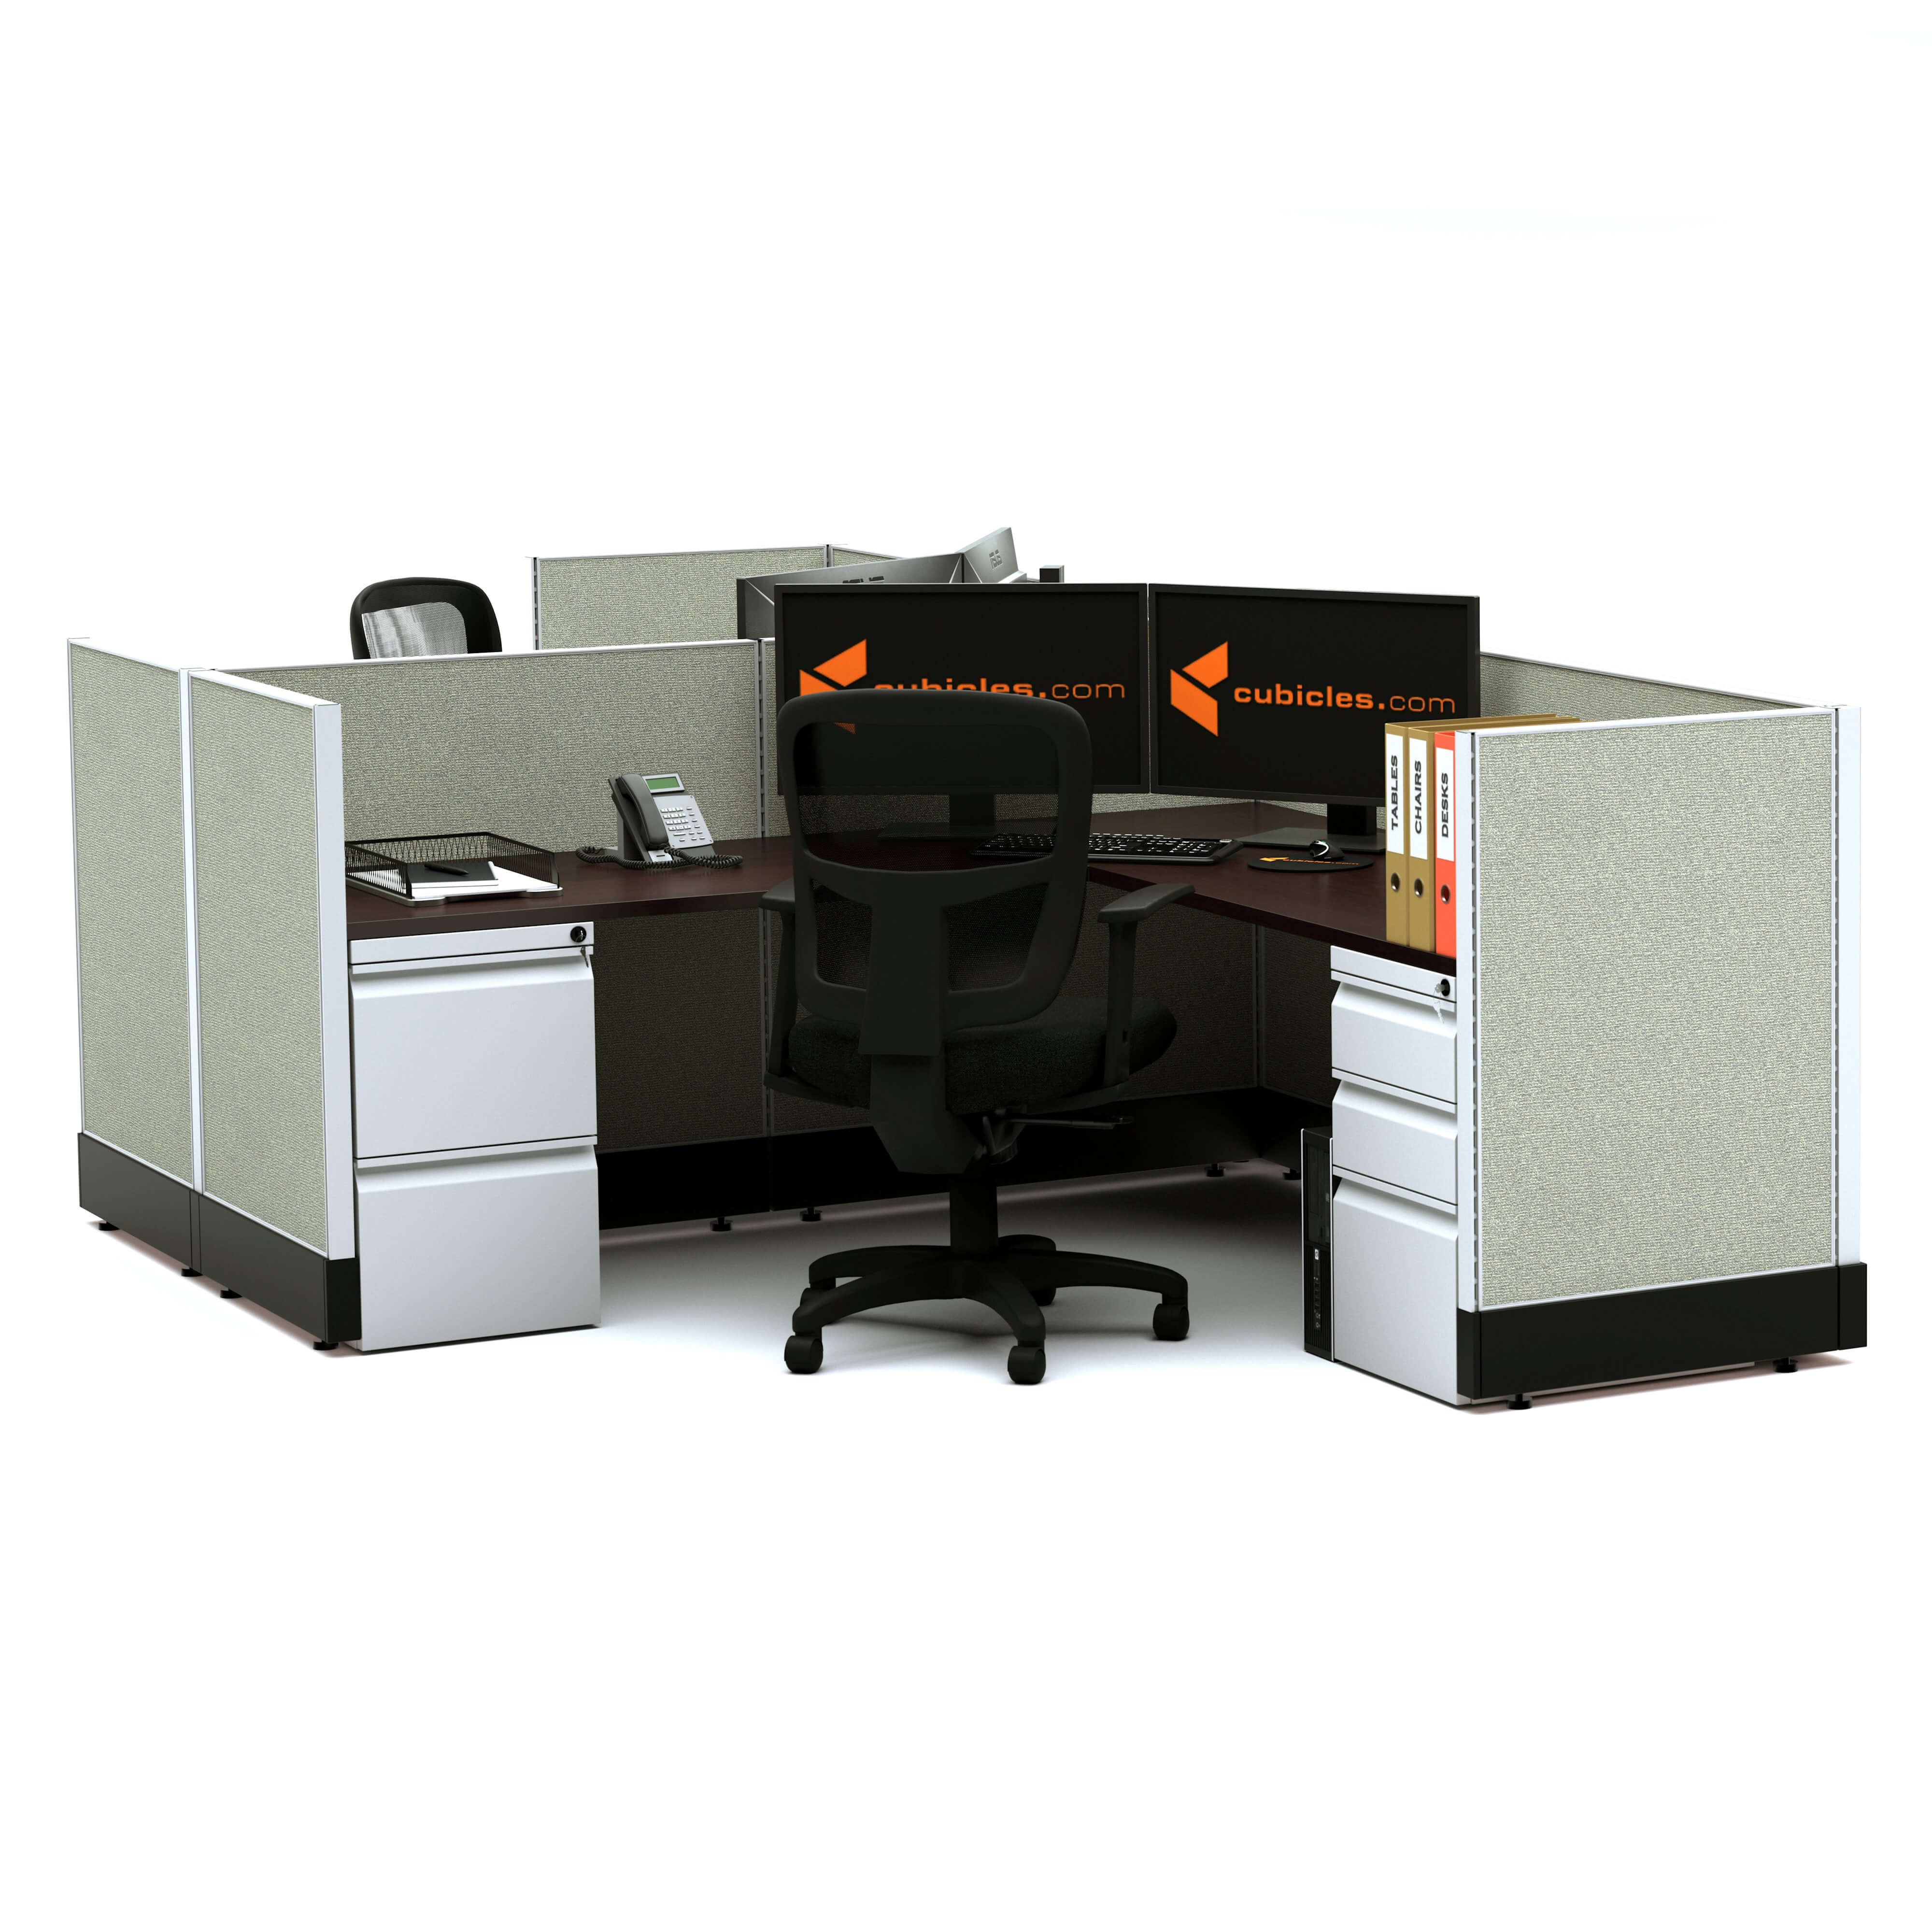 modular-office-furniture-system-furniture-39-2pack-clustered-unpowered.jpg